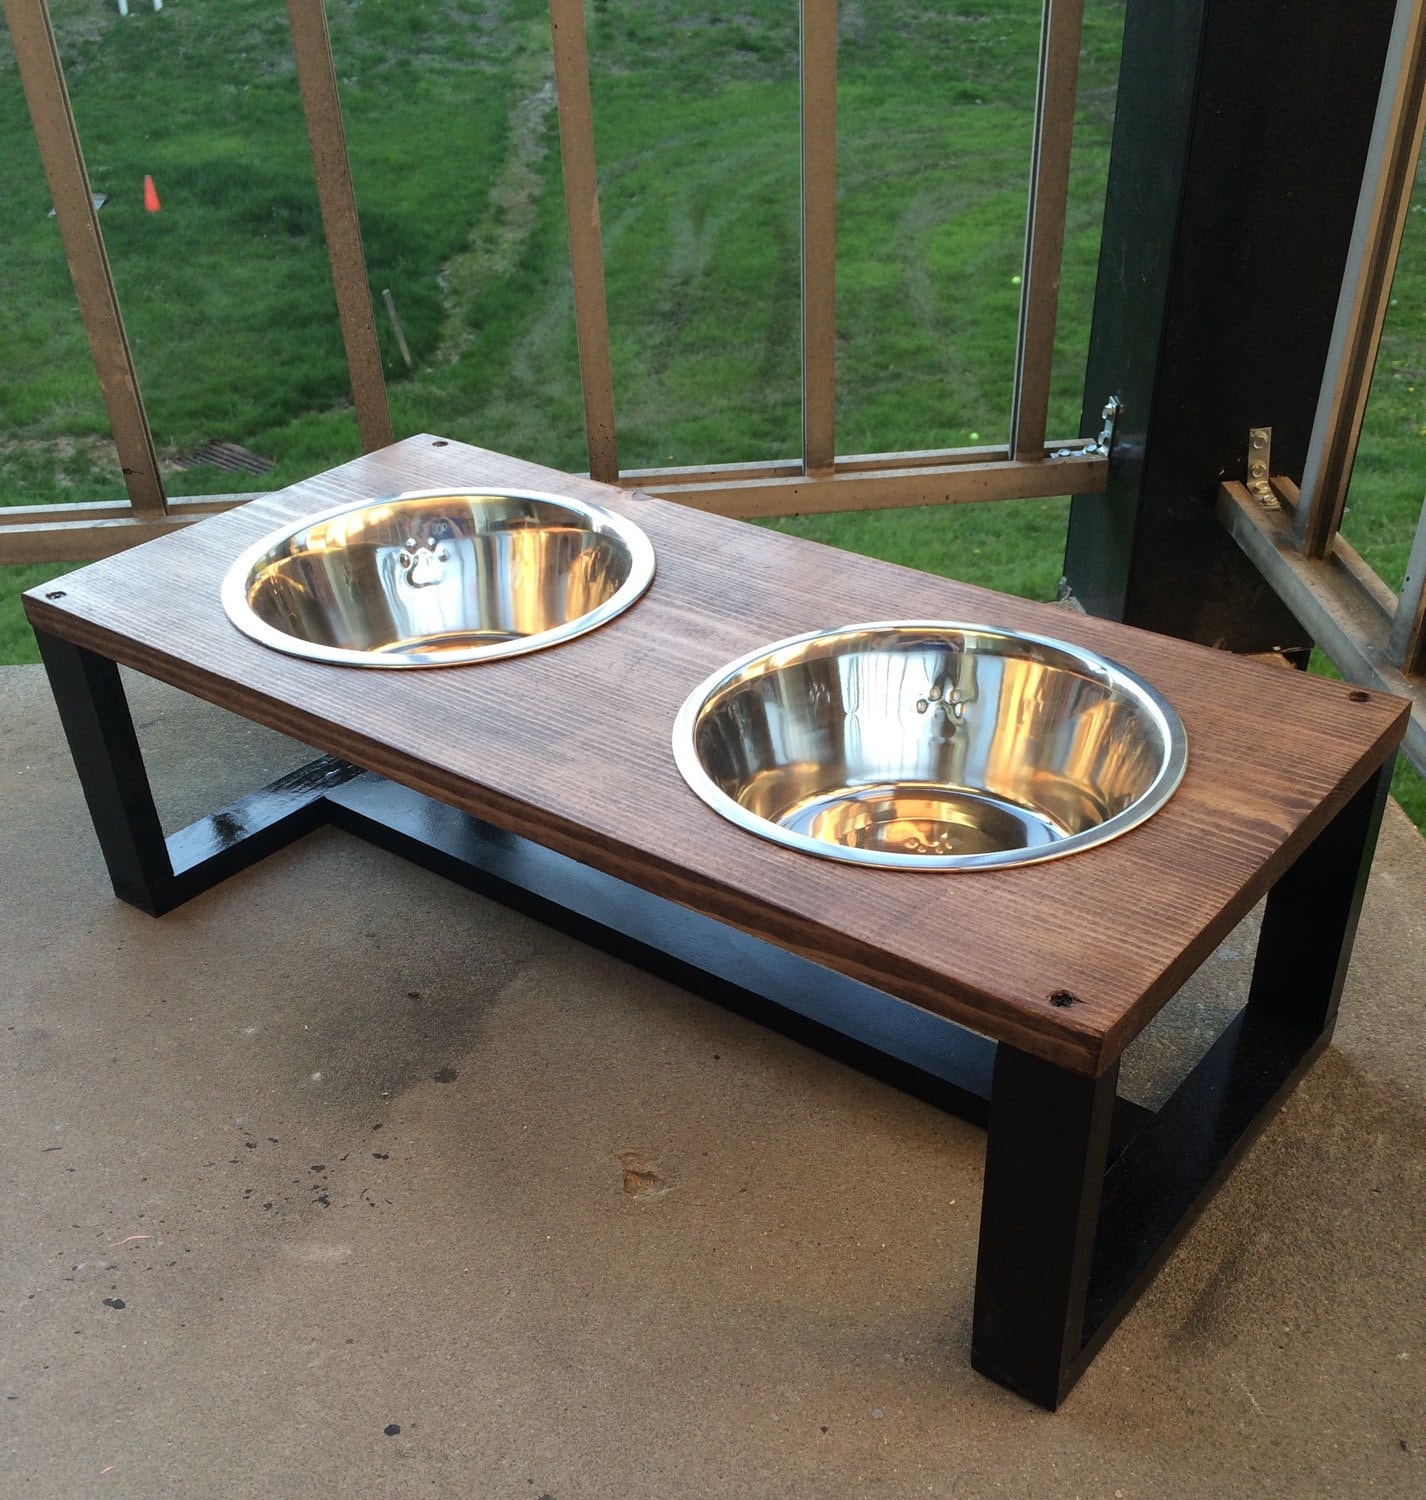 Wooden Dog Bowl Holder : 5 Steps (with Pictures) - Instructables